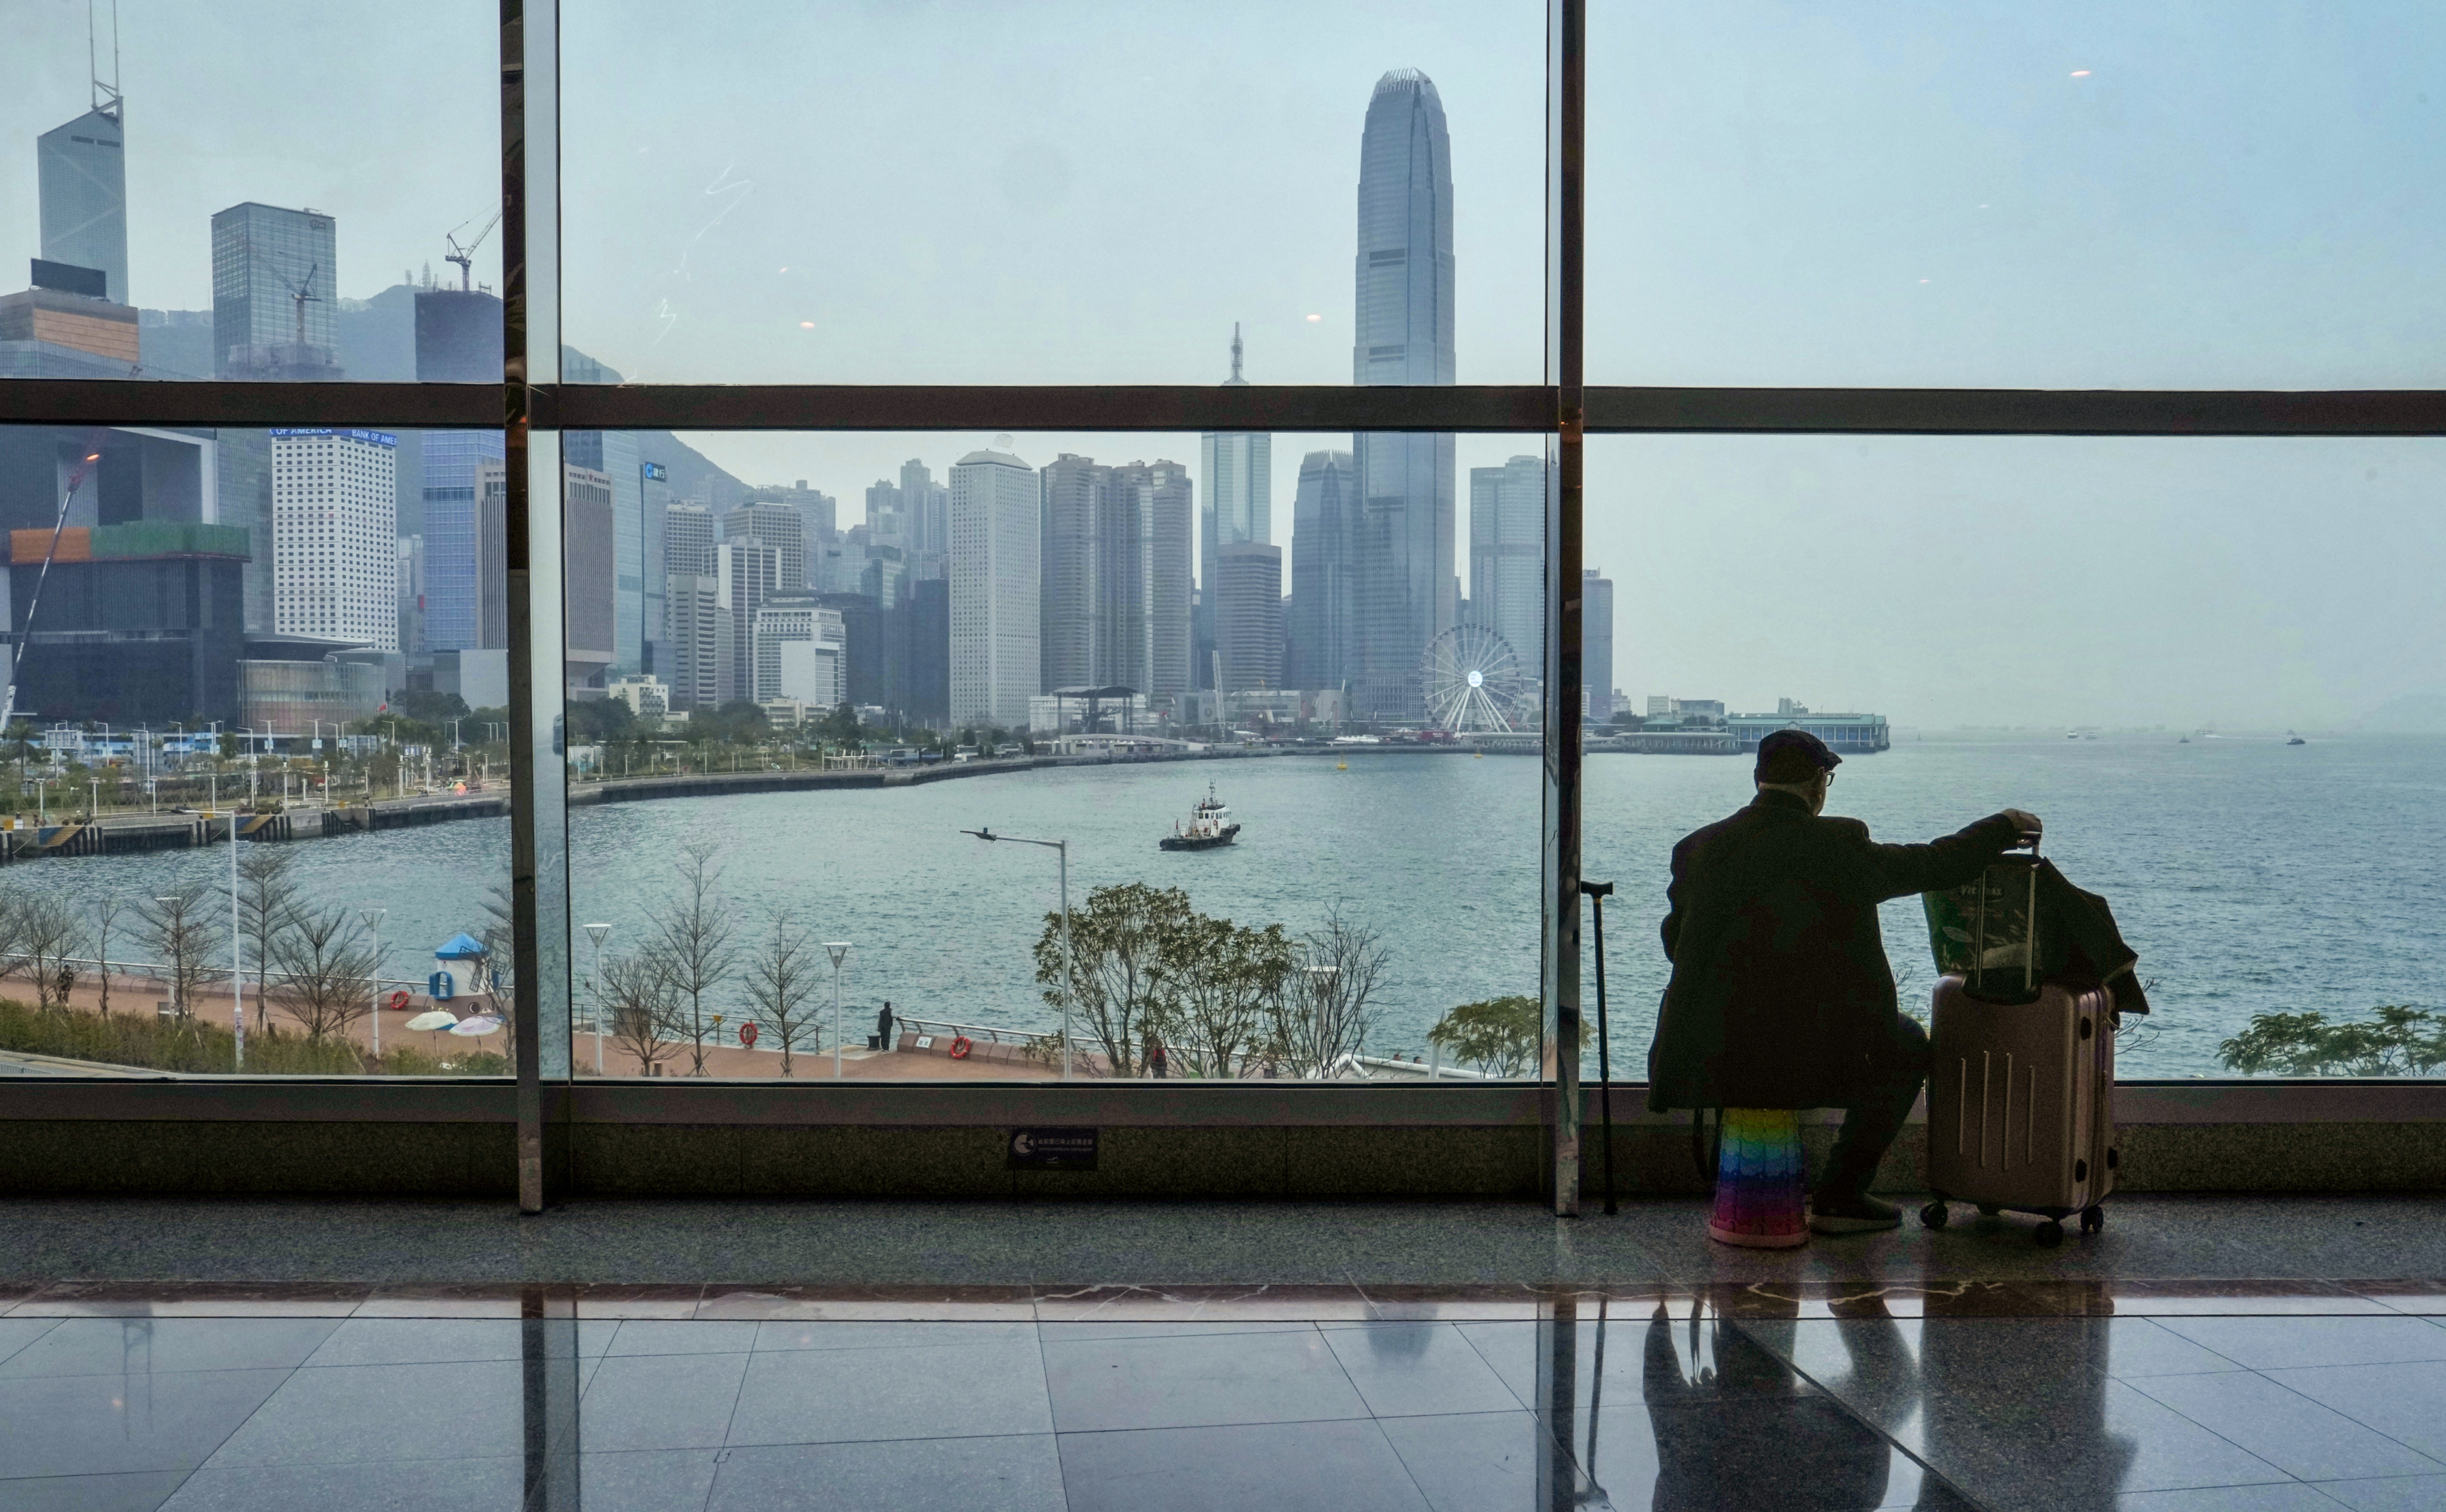 A recent survey found that wealthy mainland Chinese investors will be primarily looking to Hong Kong (pictured) for their overseas investments in the coming years. Photo: SCMP